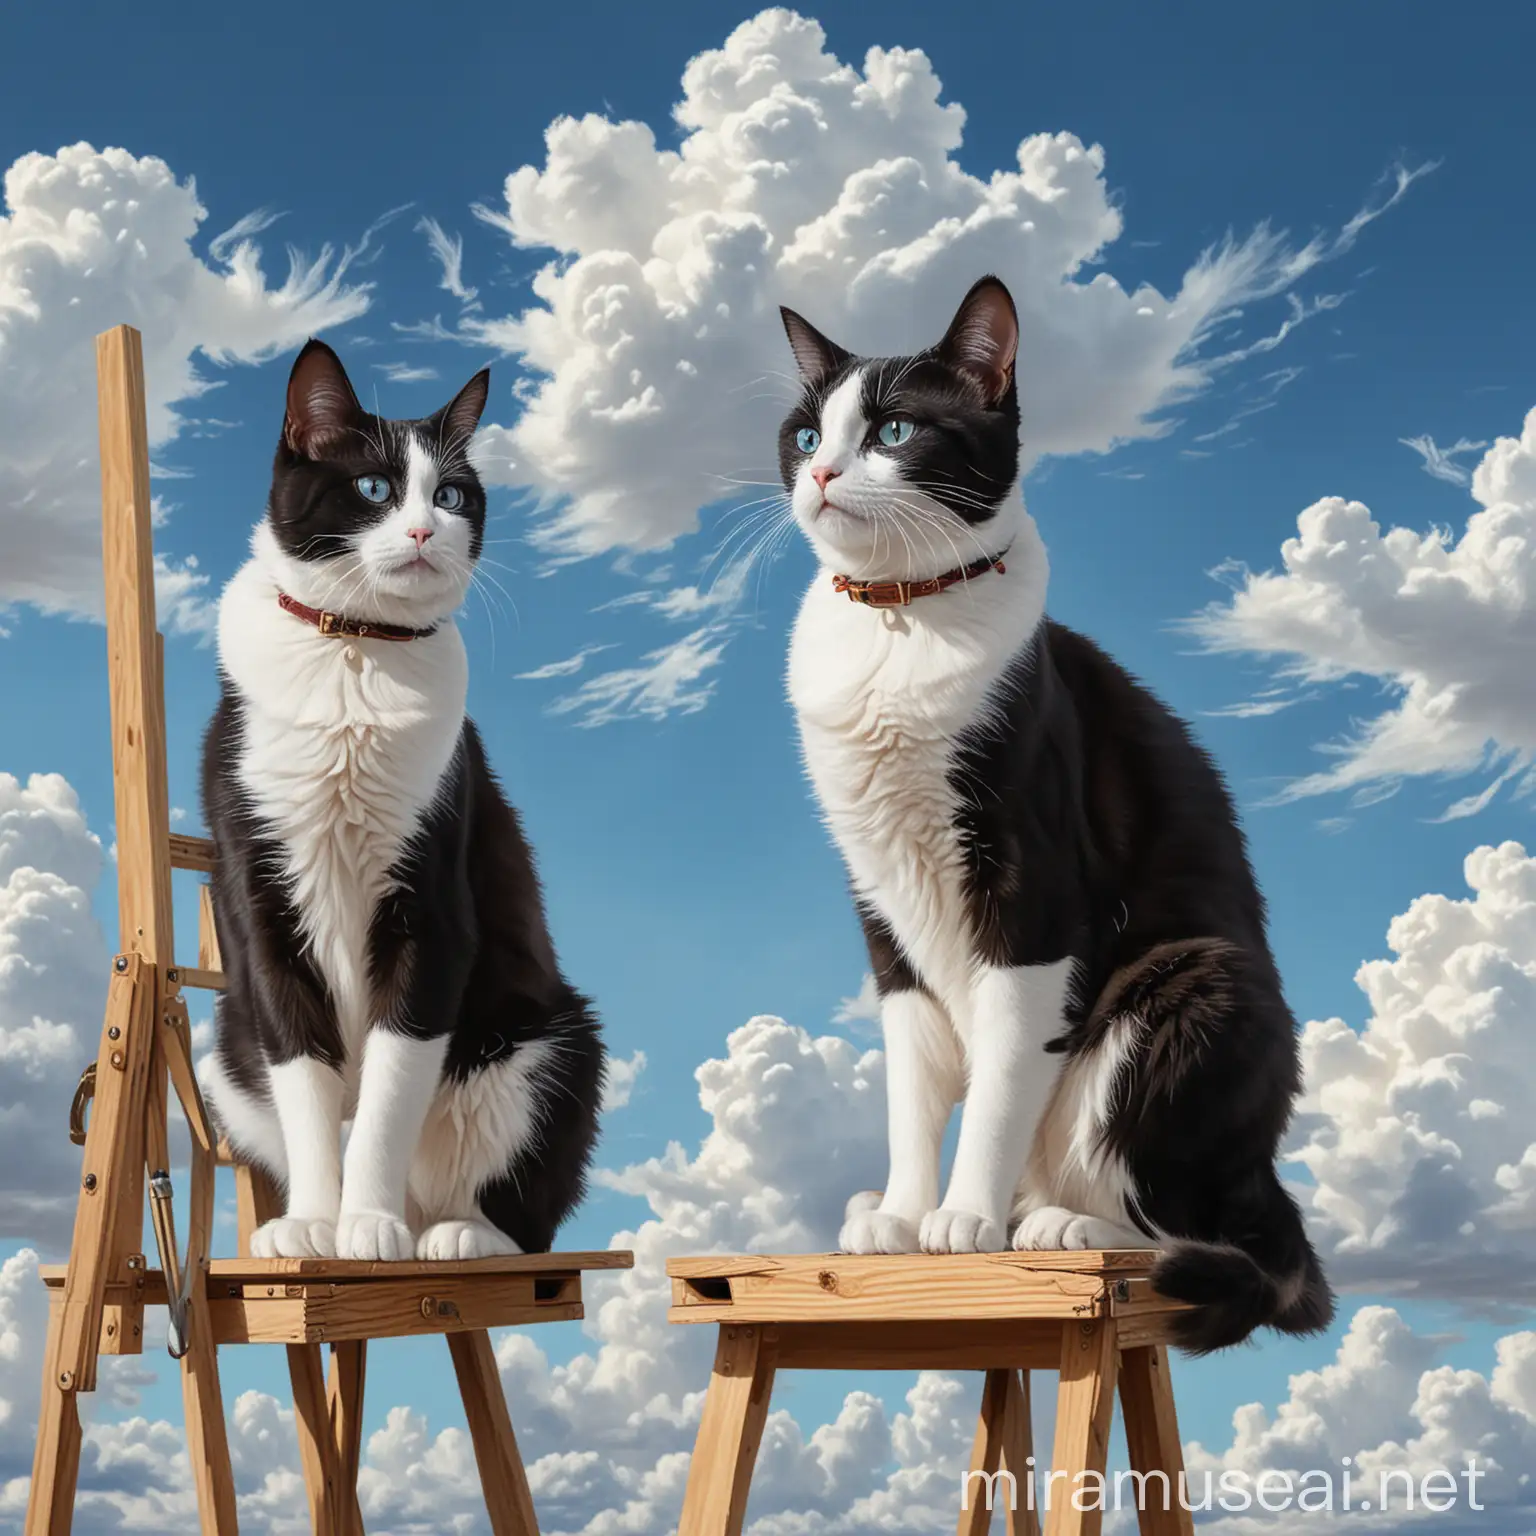 Tuxedo Cats Painting Together on High Perch Under Blue Sky